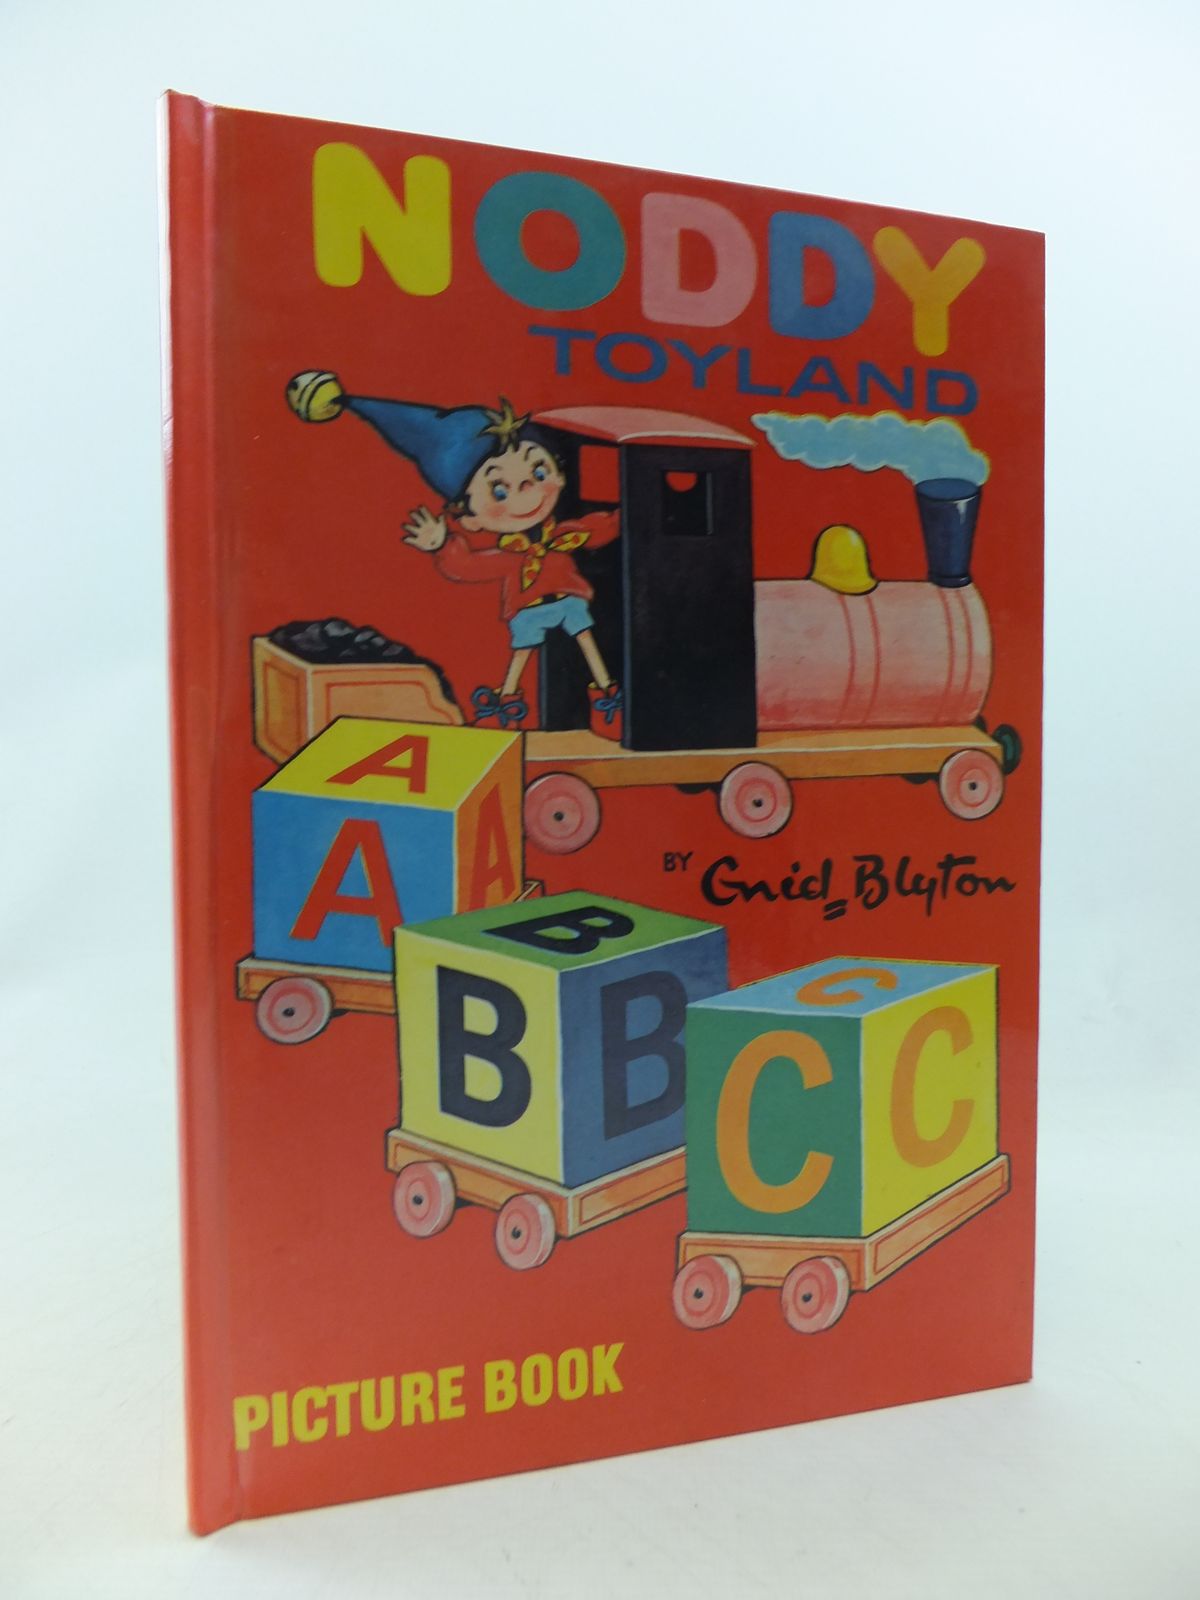 Photo of NODDY TOYLAND ABC PICTURE BOOK written by Blyton, Enid published by Sampson Low, Marston, Dennis Dobson Ltd. (STOCK CODE: 2114460)  for sale by Stella & Rose's Books